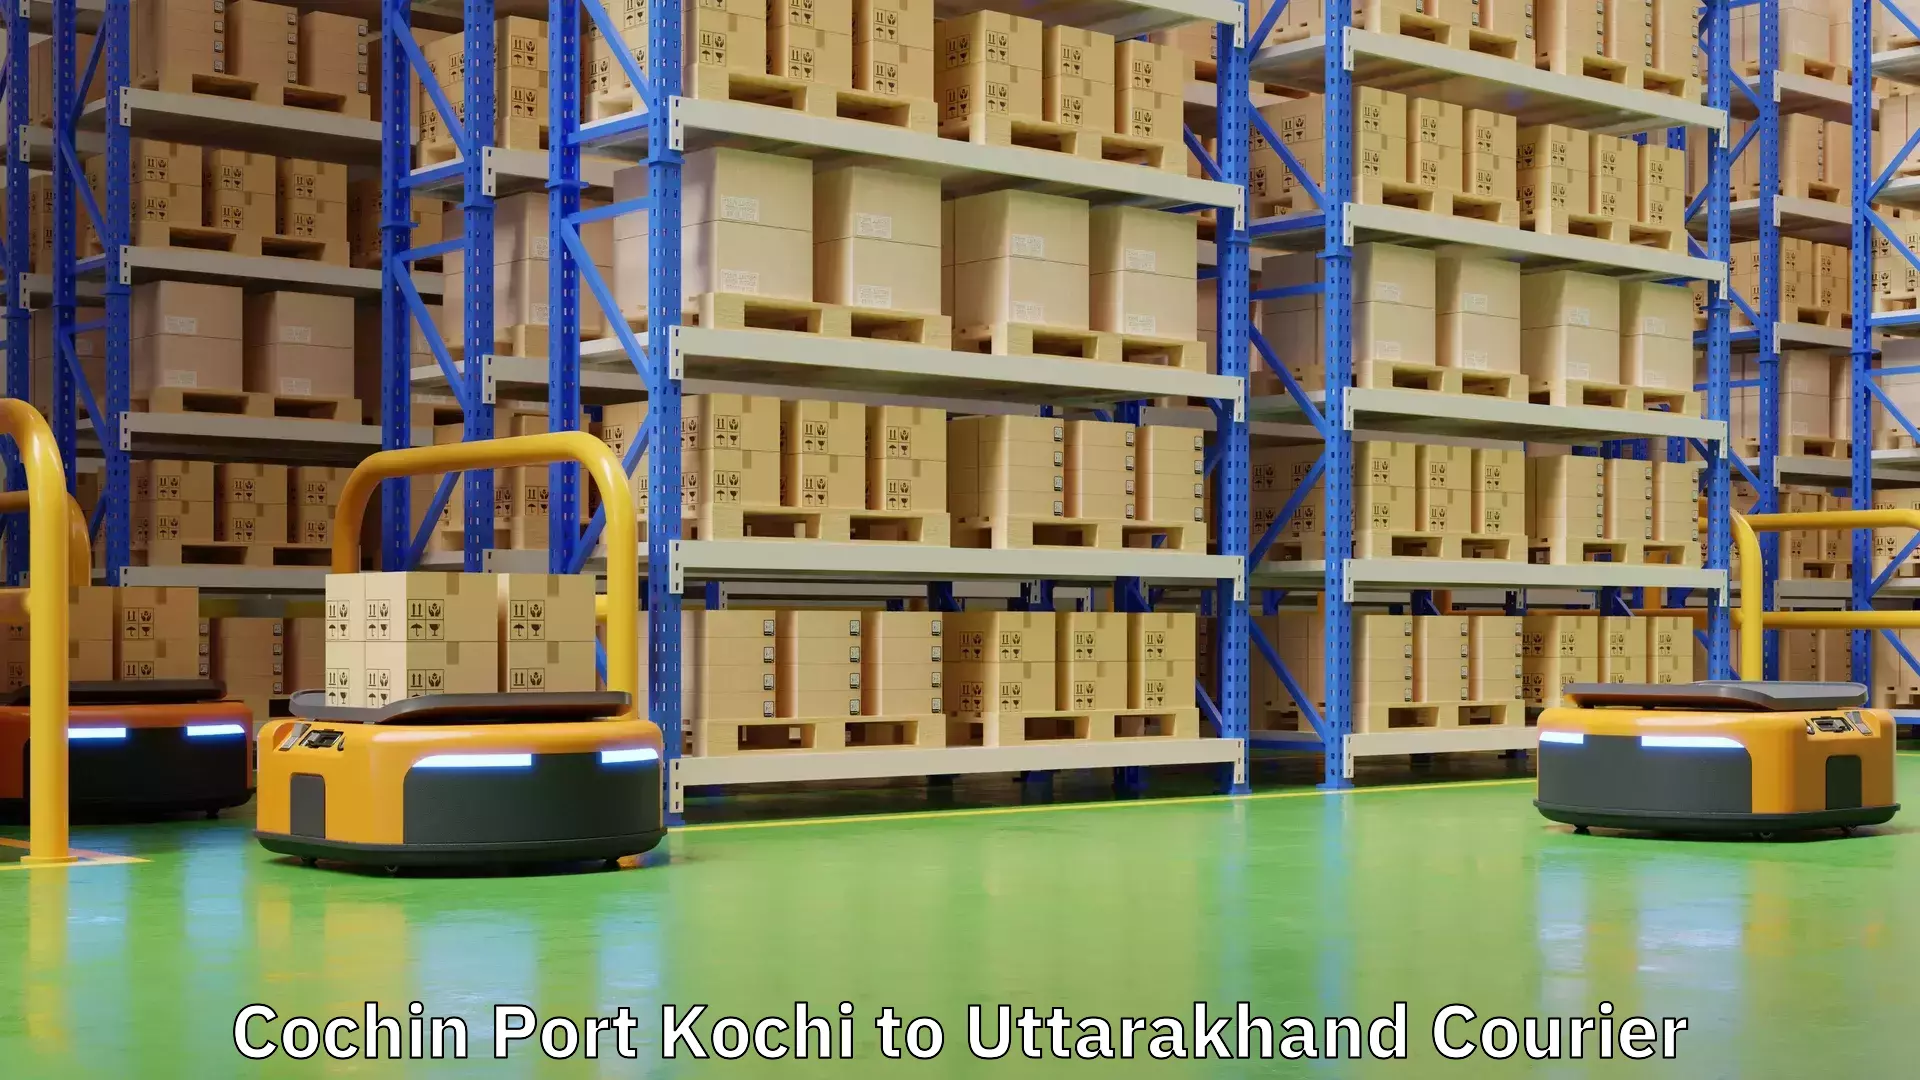 Reliable delivery network Cochin Port Kochi to Uttarakhand